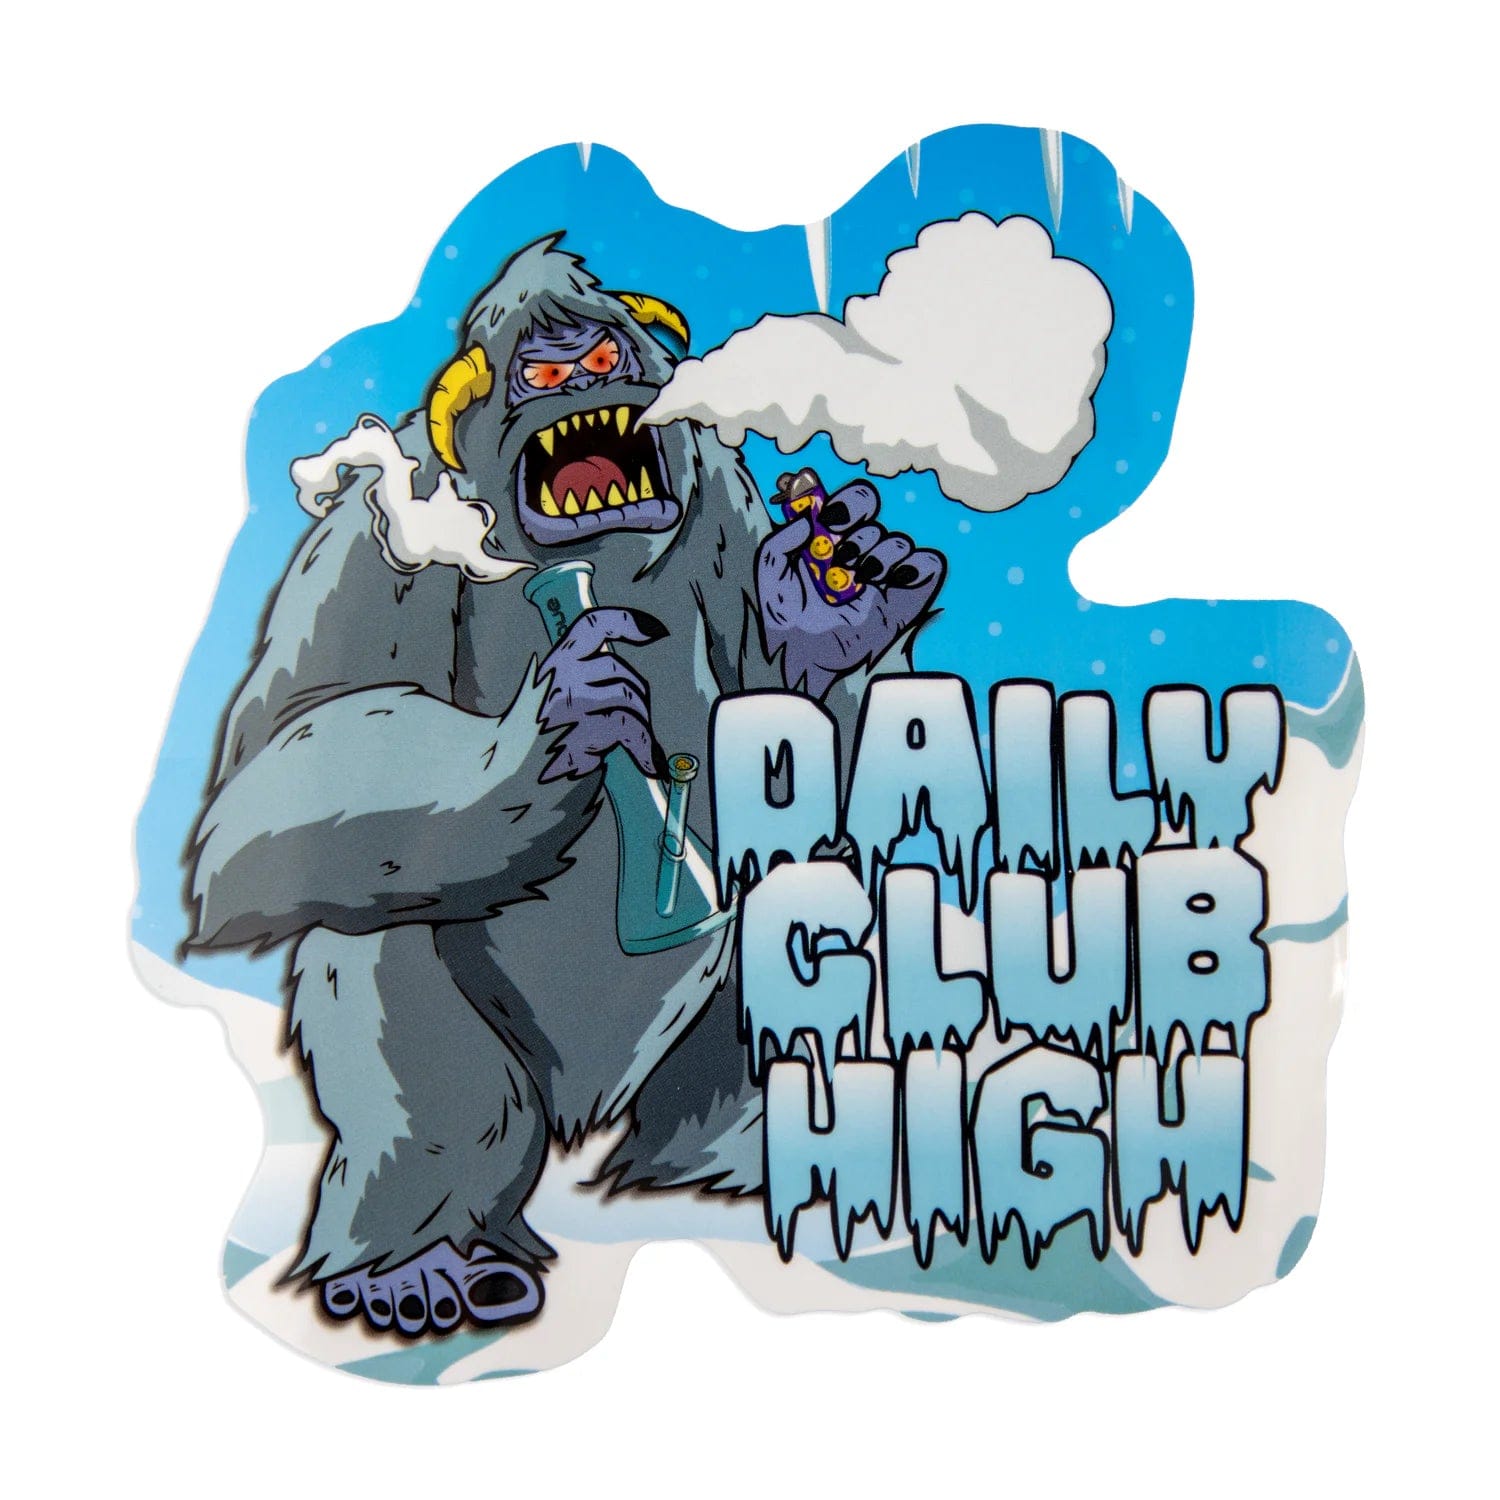 x2 Daily High Club themed stickers